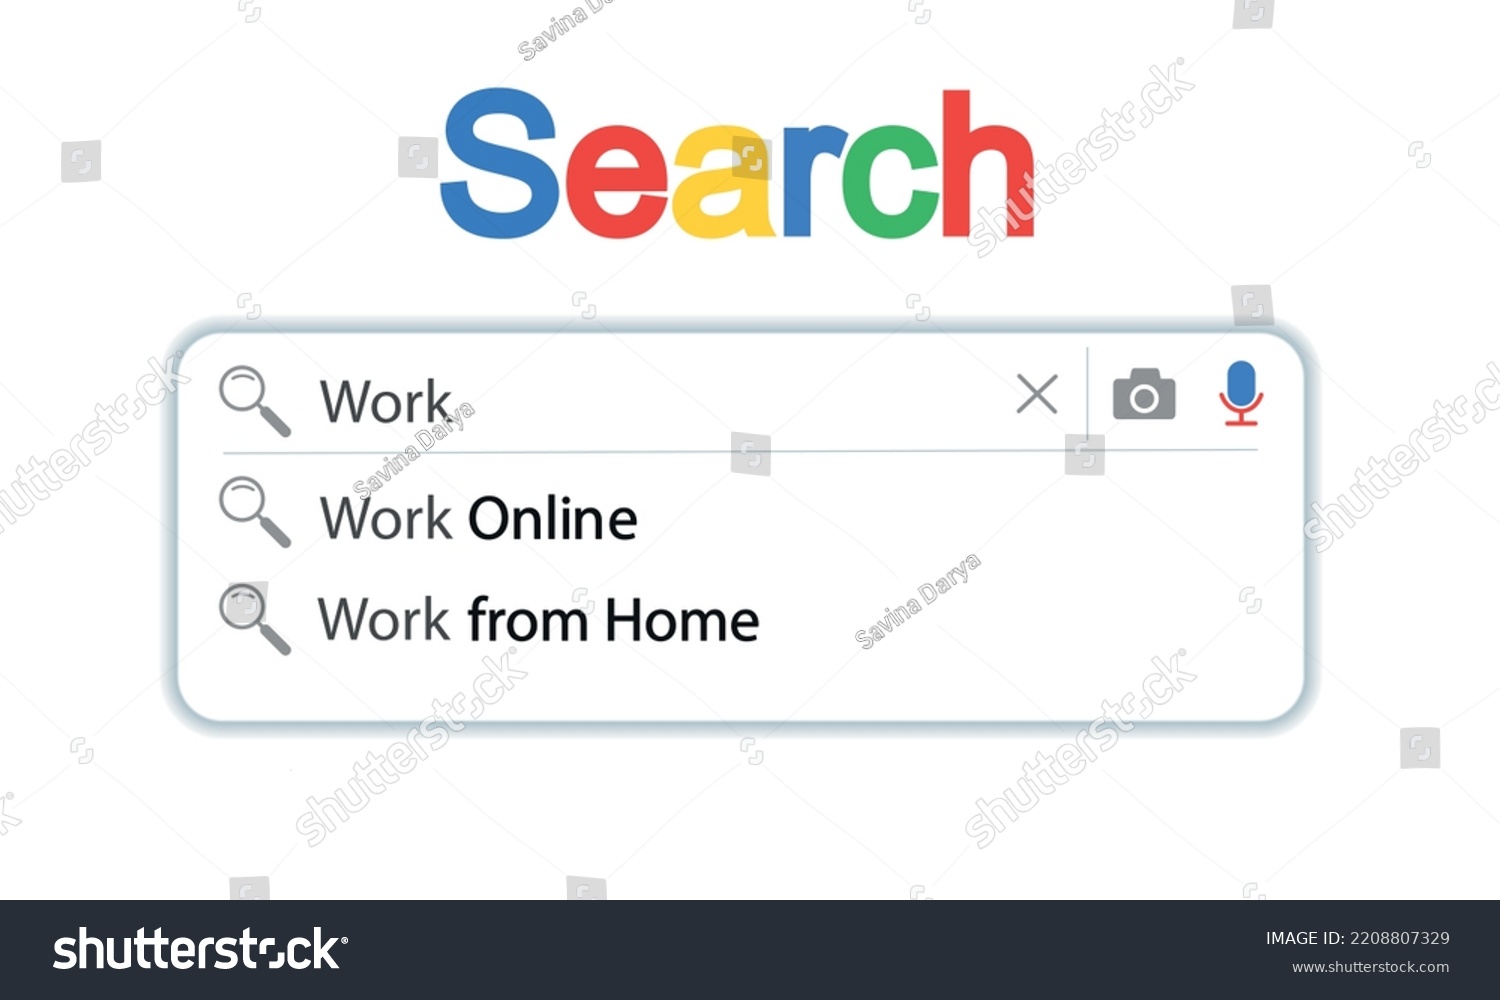 Vector creative design element of the search bar for the user interface with text about job search online or at home. Template for search forms. #2208807329